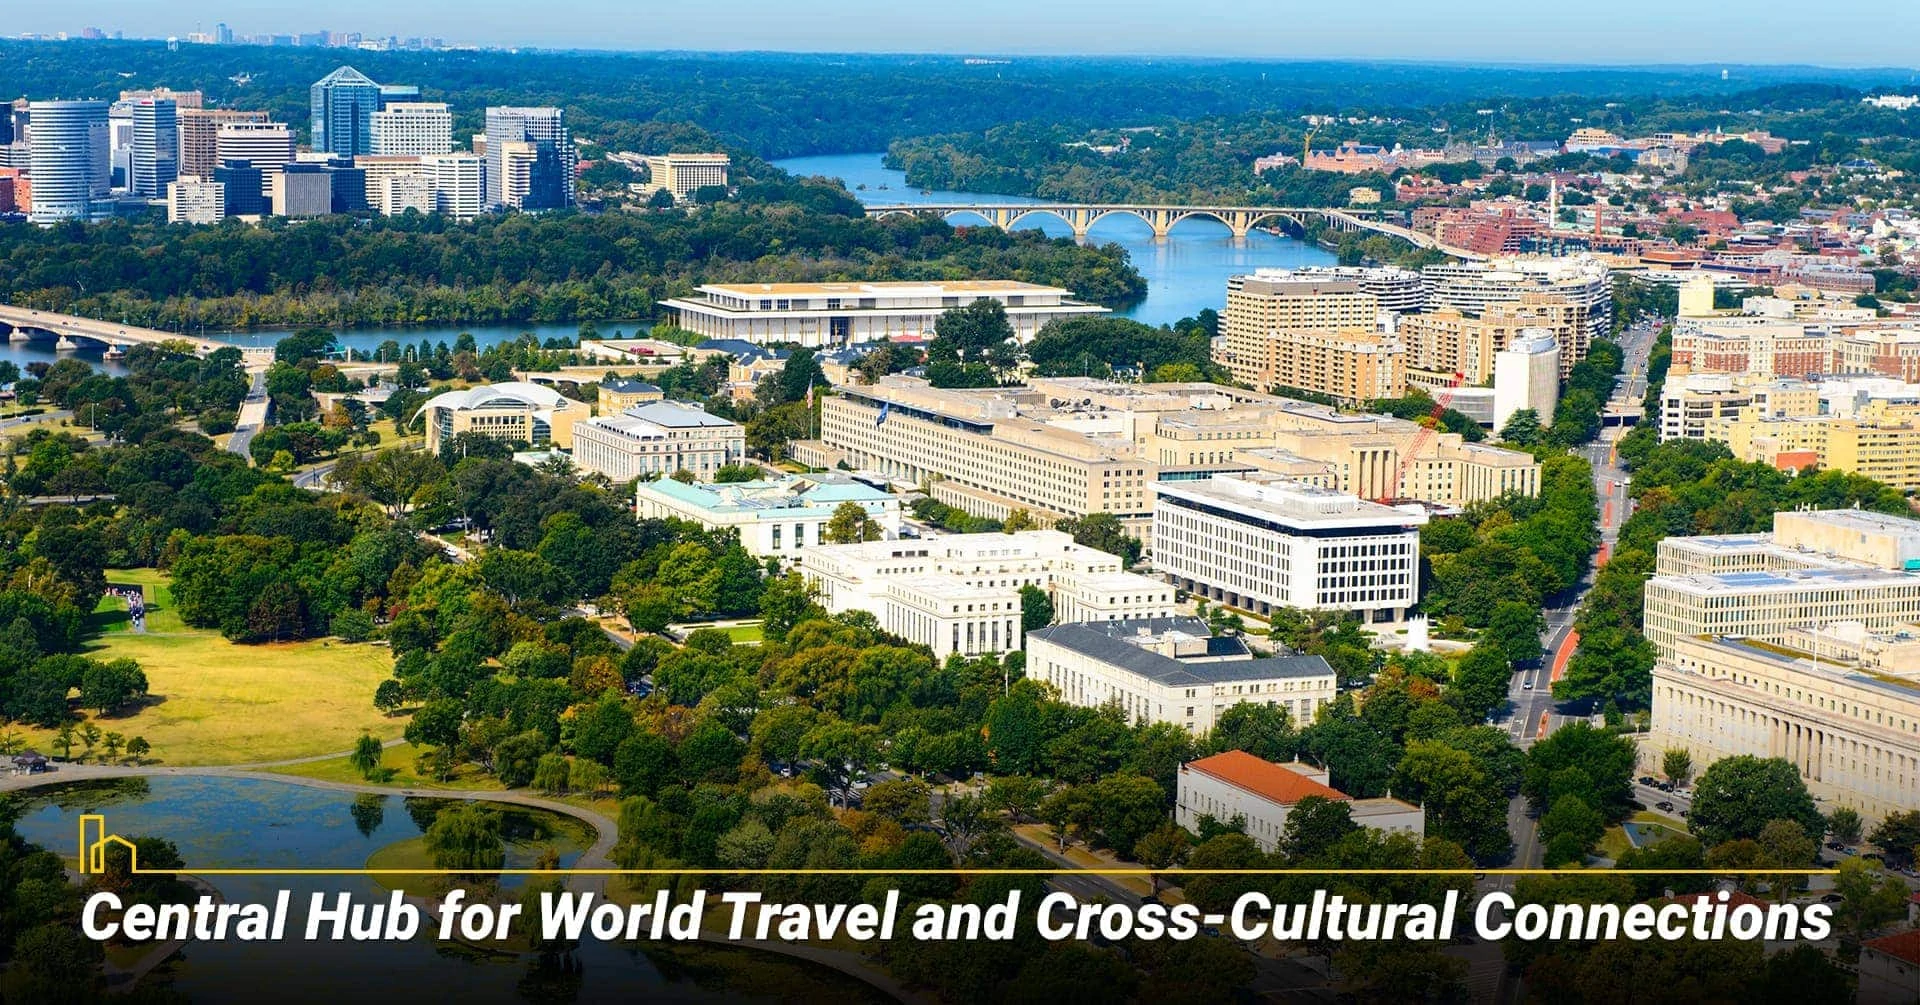 Washington DC is a Central Hub for World Travel and Cross-Cultural Connections